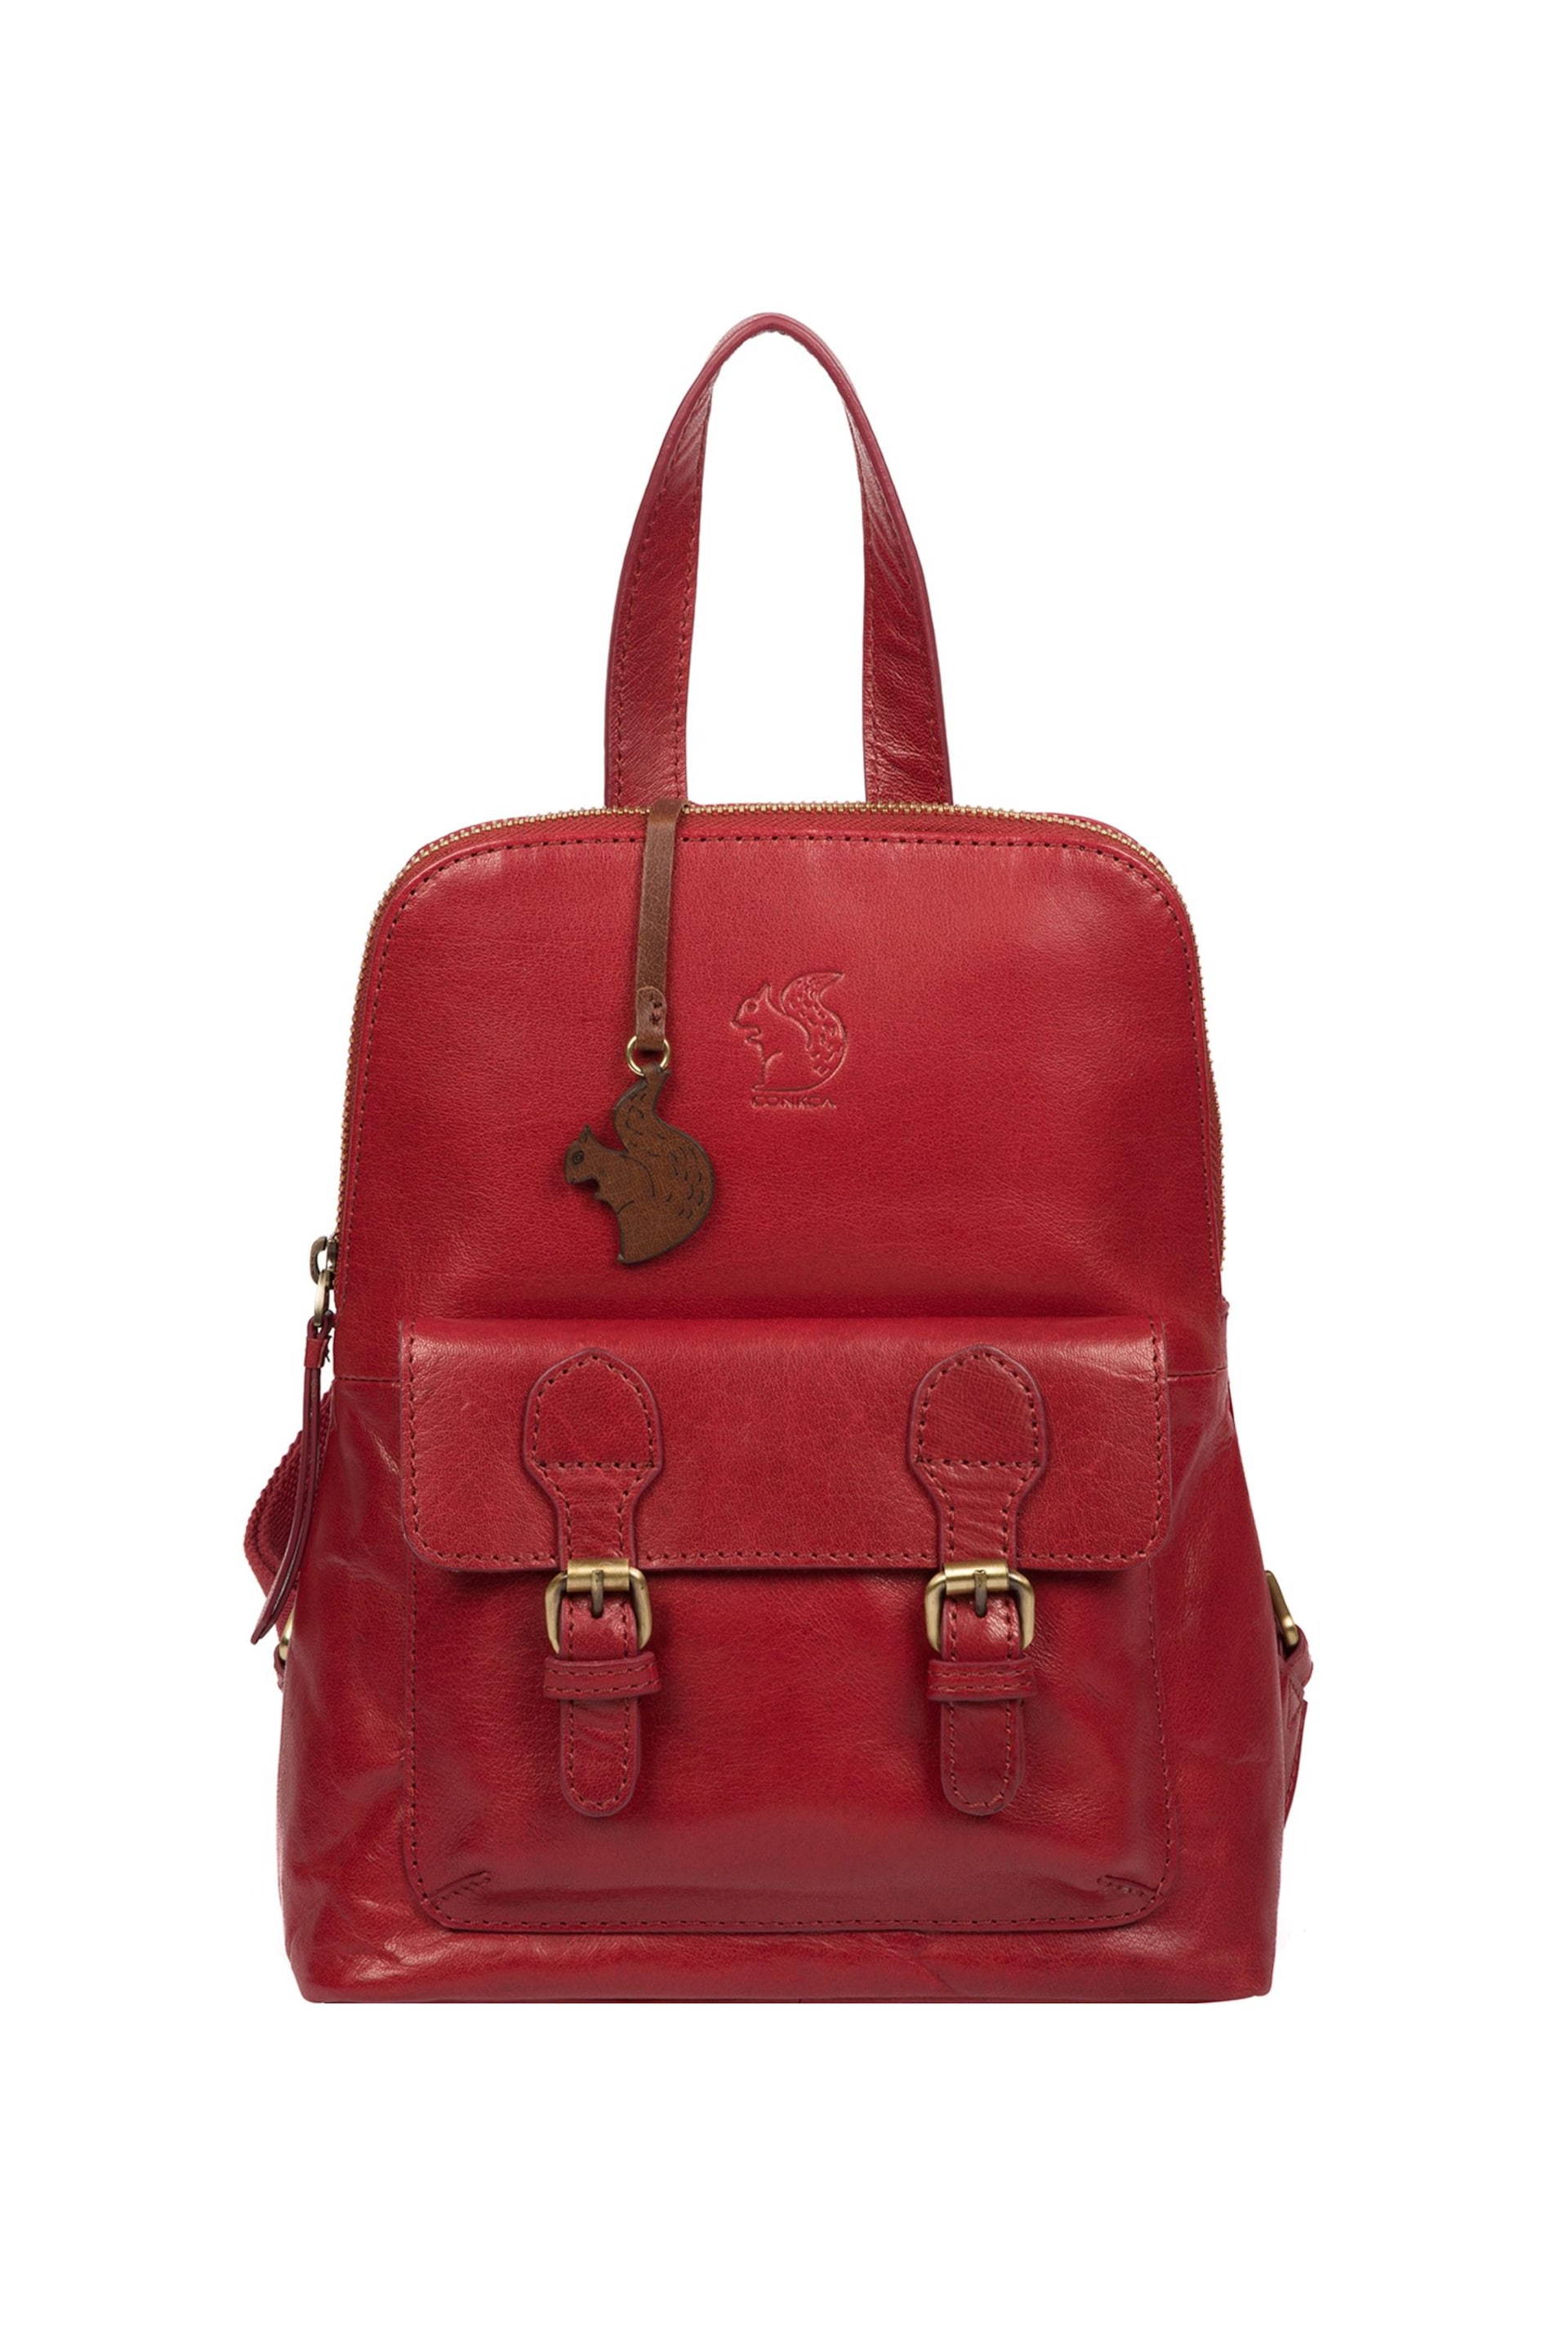 Conkca Kendal Leather Backpack - Image 1 of 5